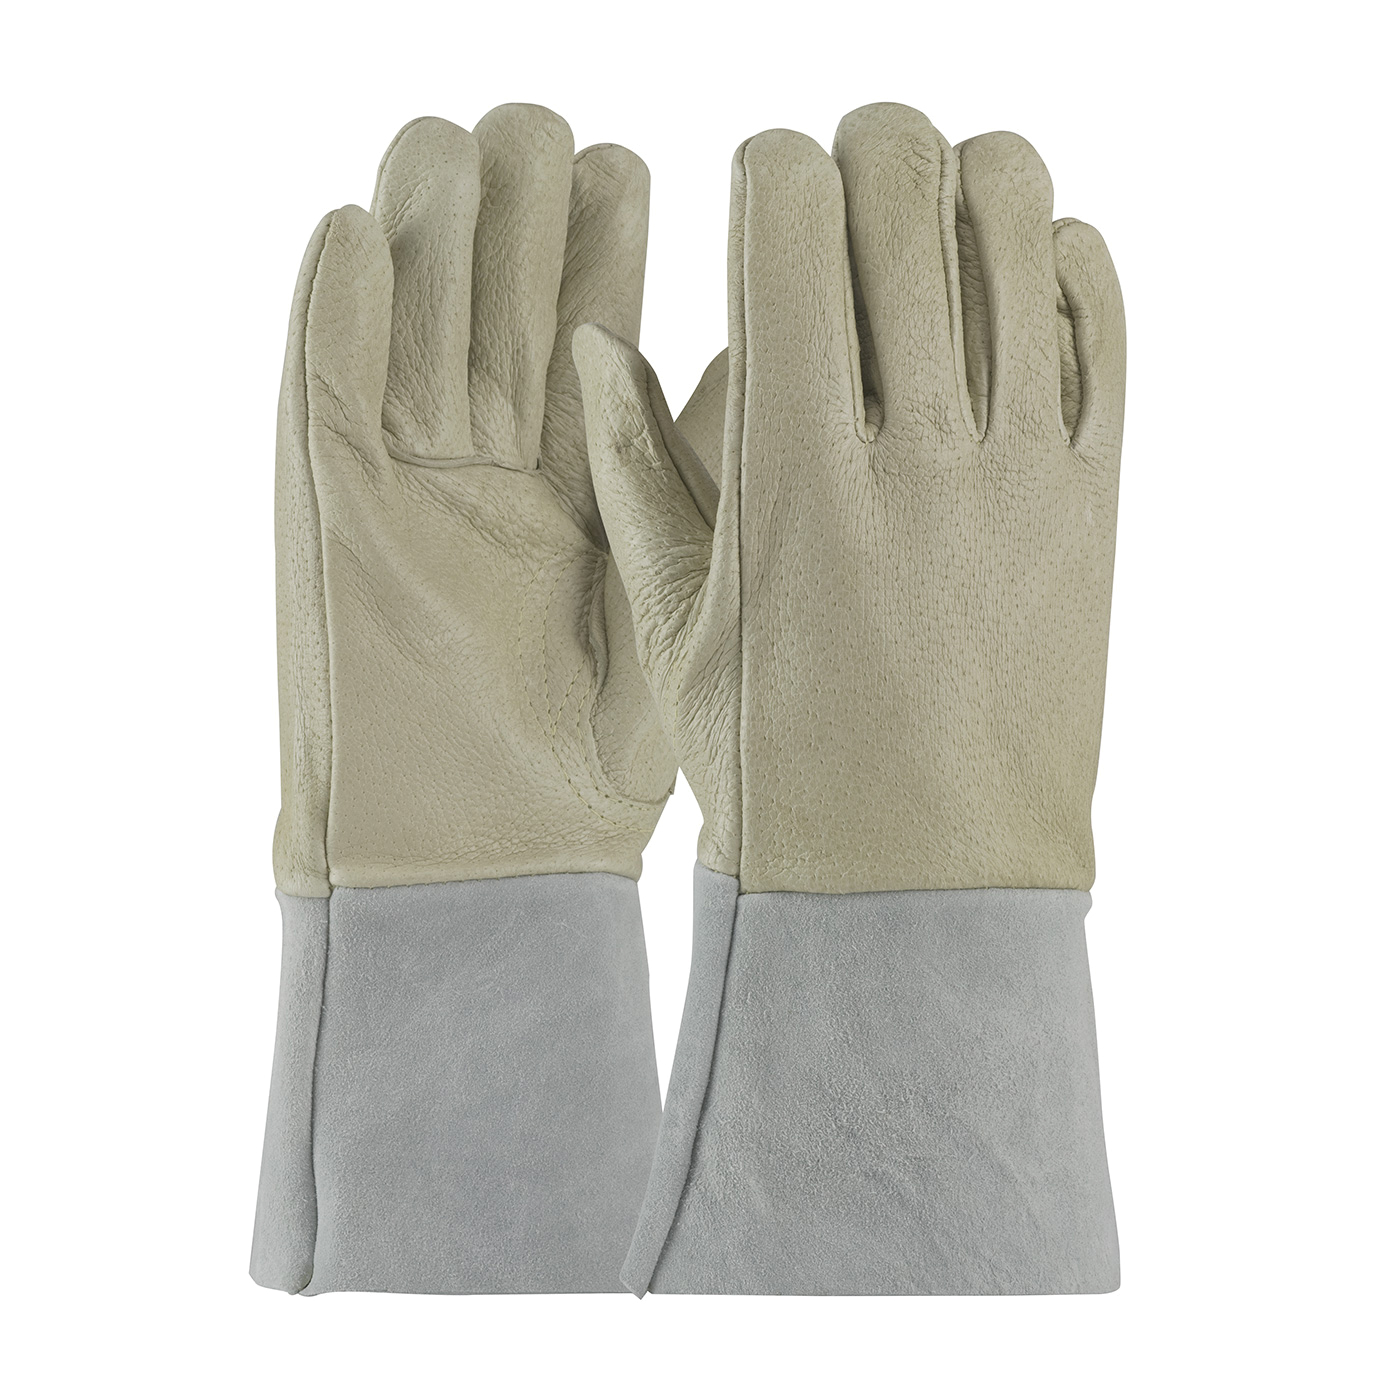 PIP® 75-320/L Men's MIG/TIG Welding Gloves, L, Top Grain Pig Skin Leather/Cowhide Split Leather/Kevlar® Stitching, Beige/Gray, Unlined, Full Leather Gauntlet Cuff, 12 in L, 1.1 mm Glove Material Thickness